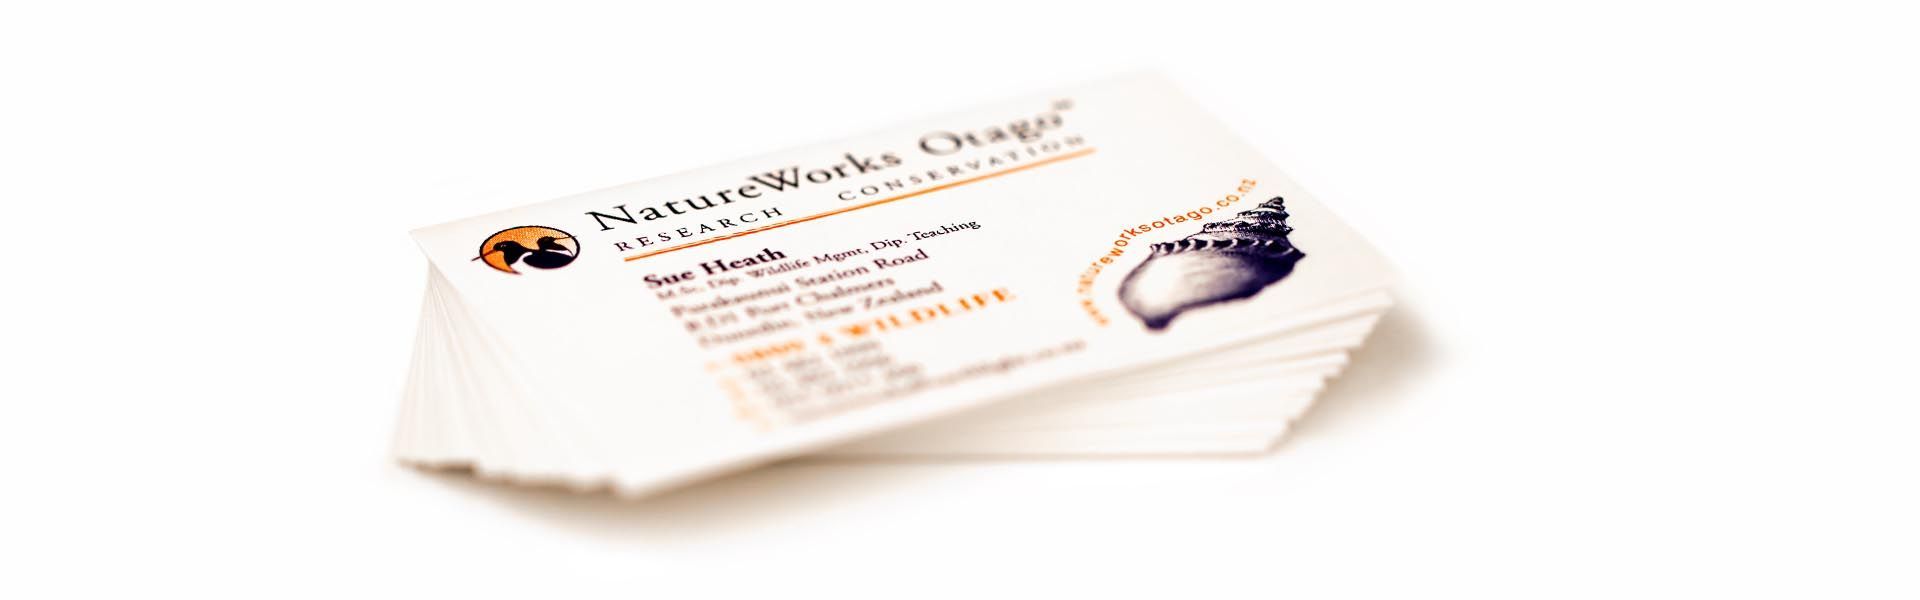 a stack of business cards for natureworks otago